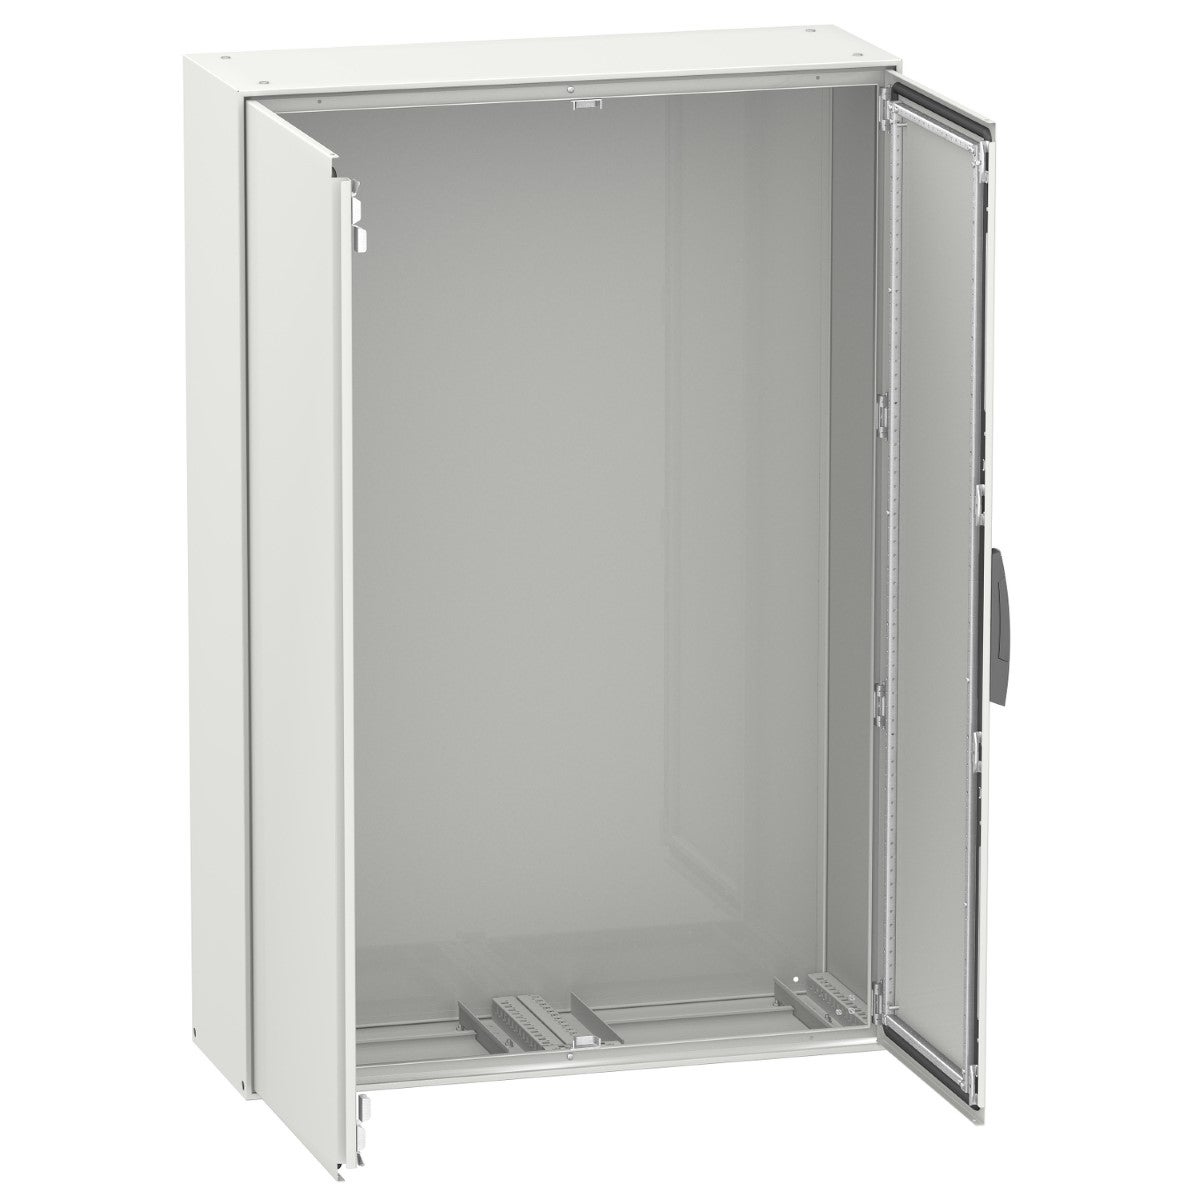 Spacial SM compact enclosure without mounting plate - 1800x1200x500 mm